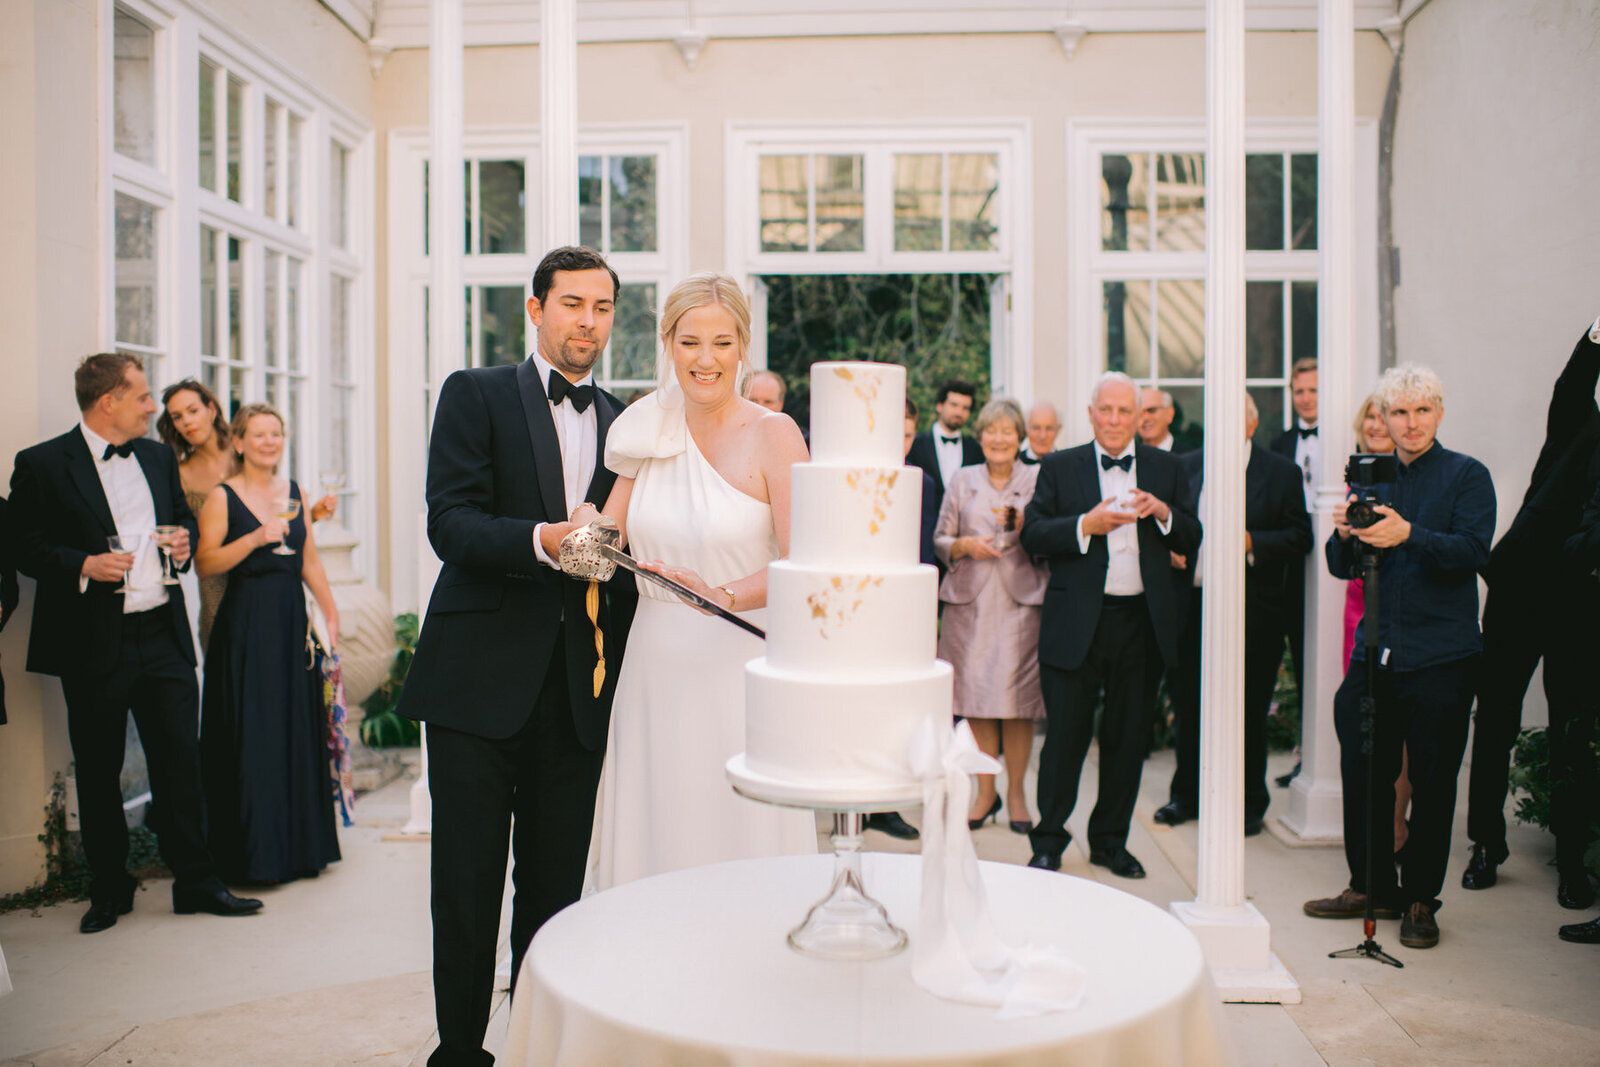 Bride and groom cutting cake  under domed conservatory